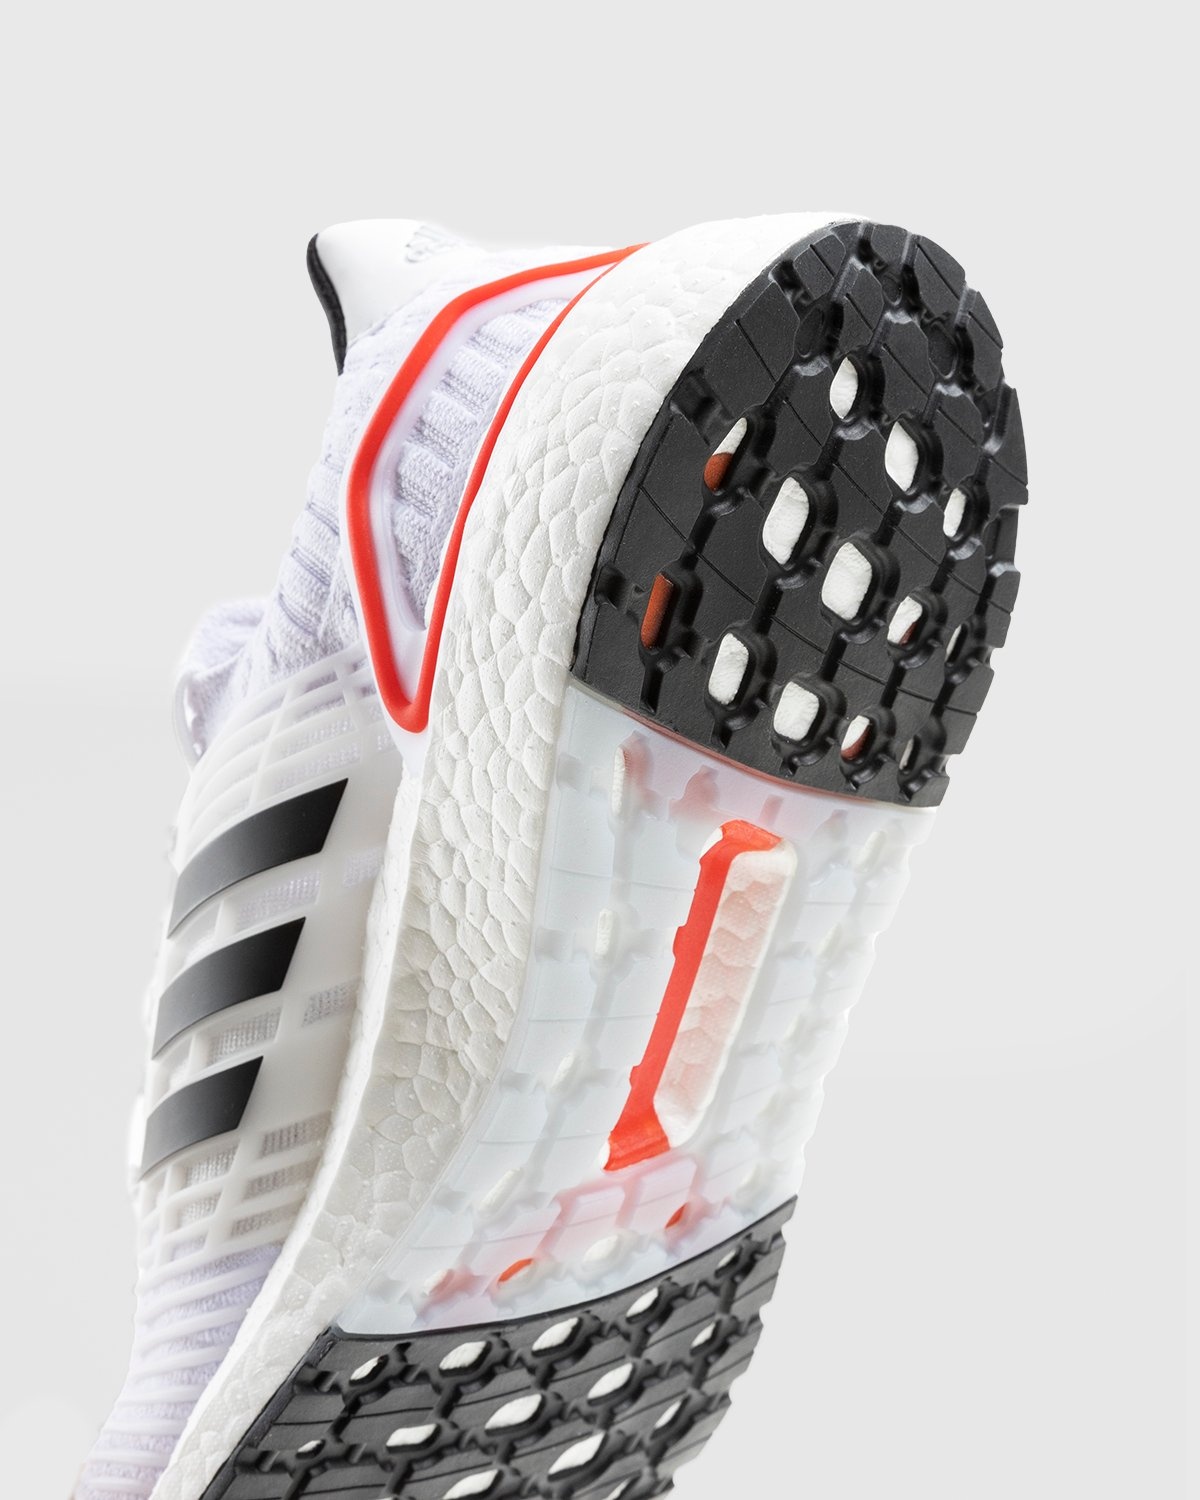 Adidas – Ultraboost Climacool 1 DNA White/Black/Red